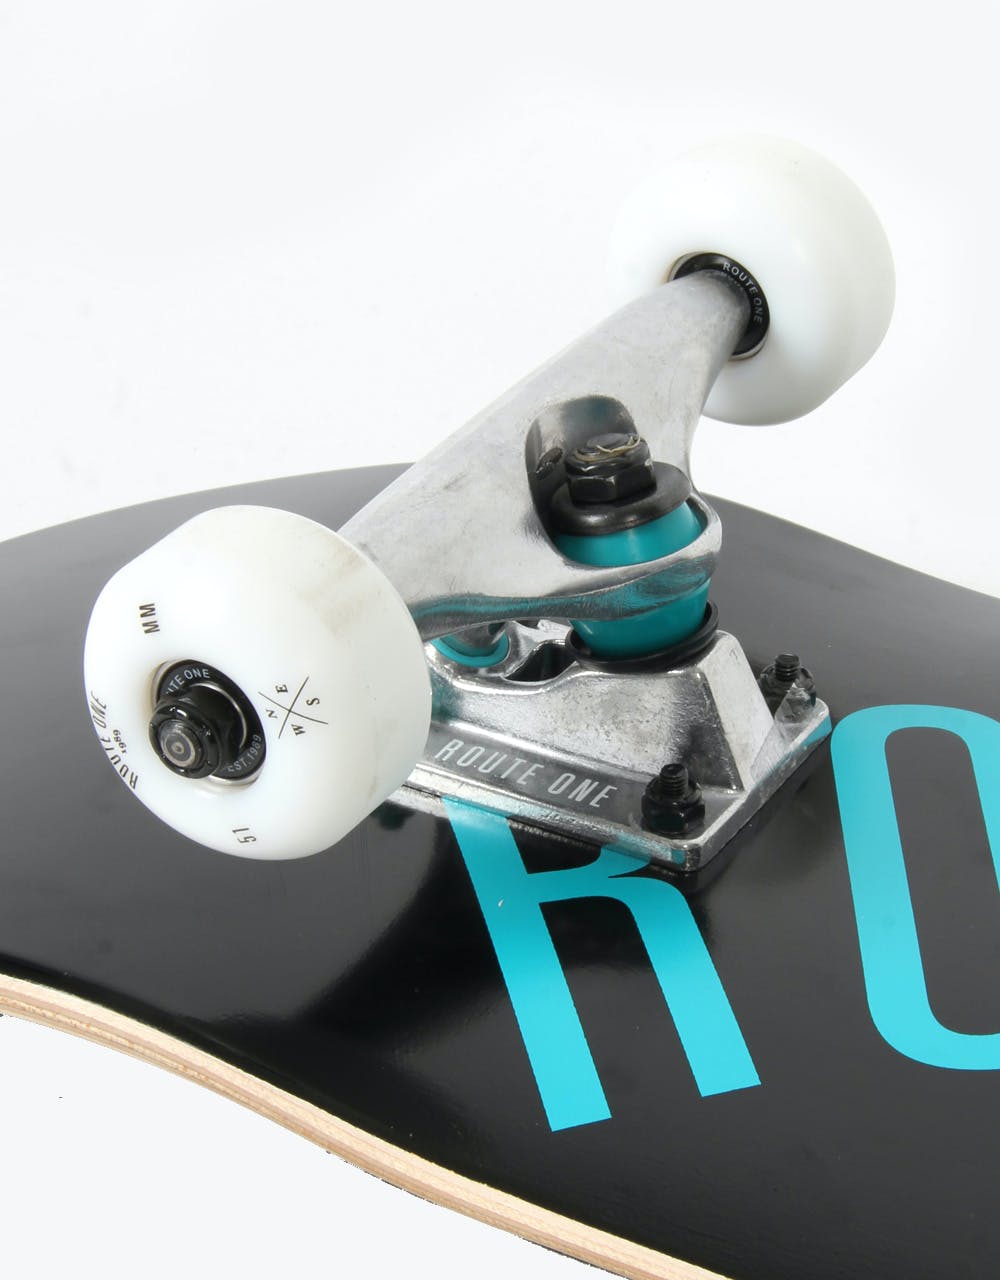 Route One Arch Logo Complete Skateboard - 8"